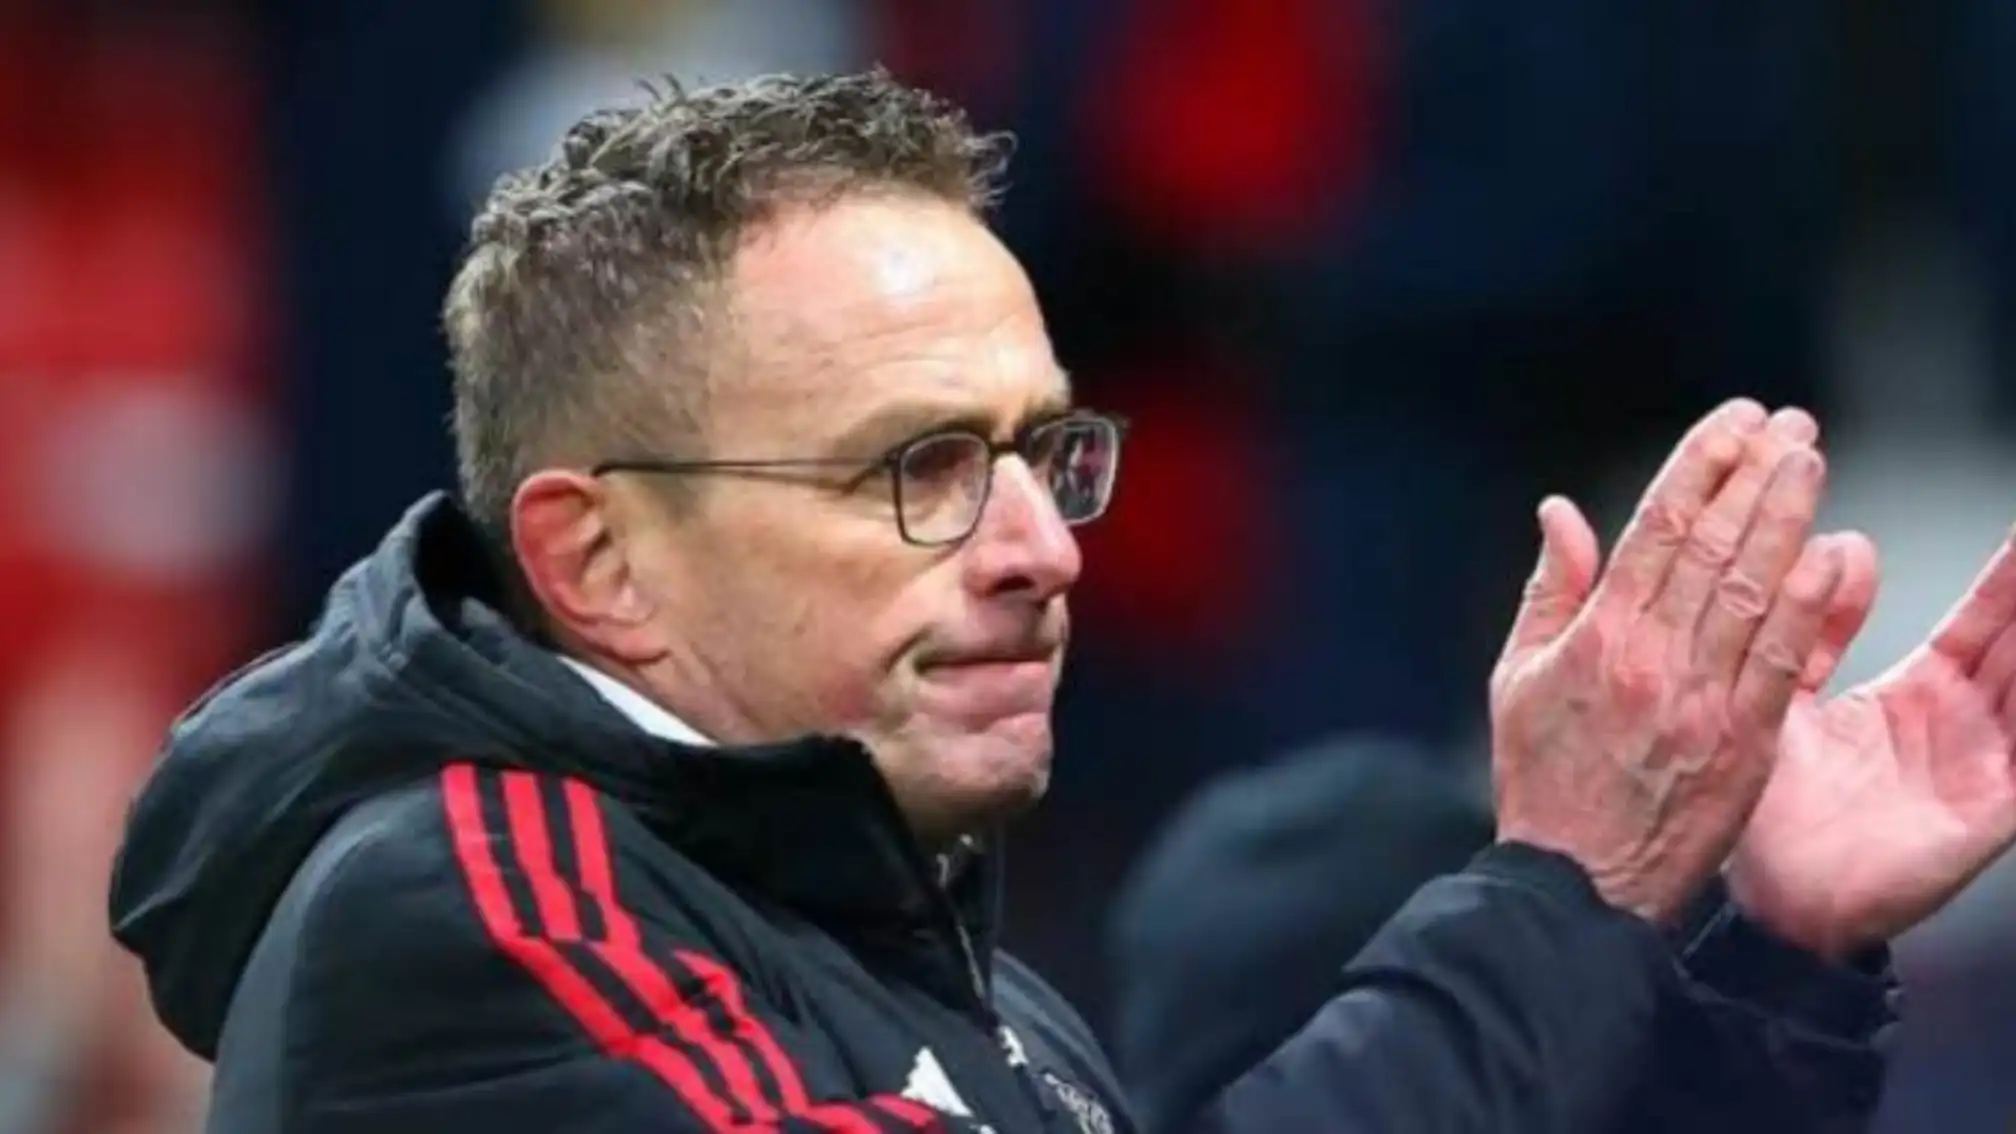 Ten Hag will struggle to sign players if other Premier League clubs are interested, Rangnick claims